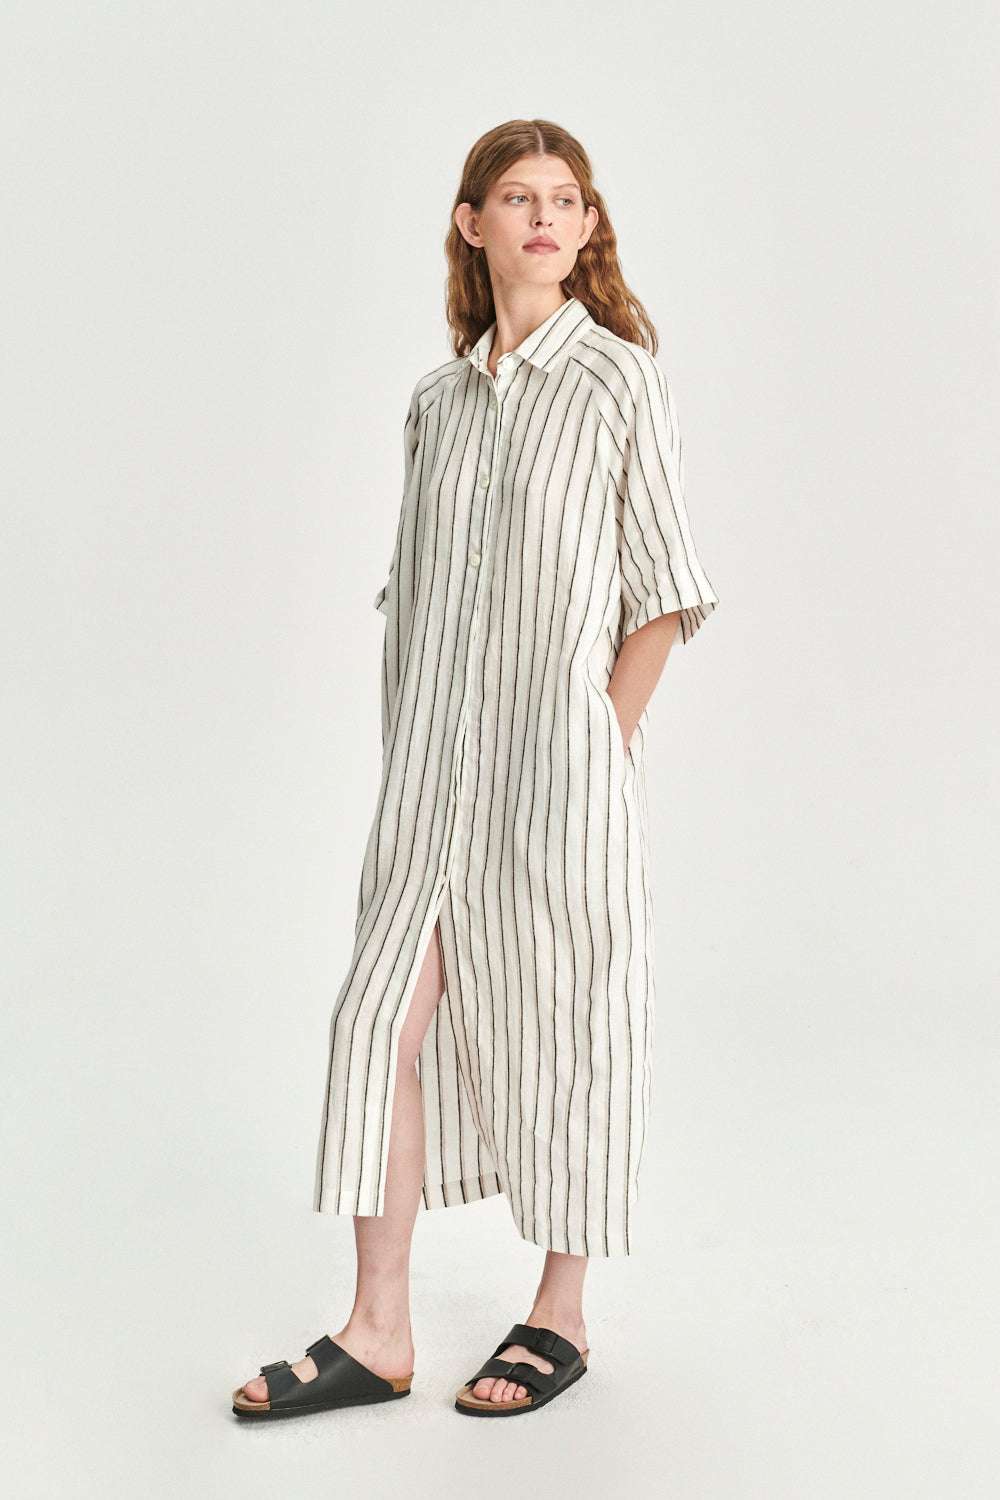 Dress in a  in a Fine White Black and Beige Airy Double Striped Bohemian Linen